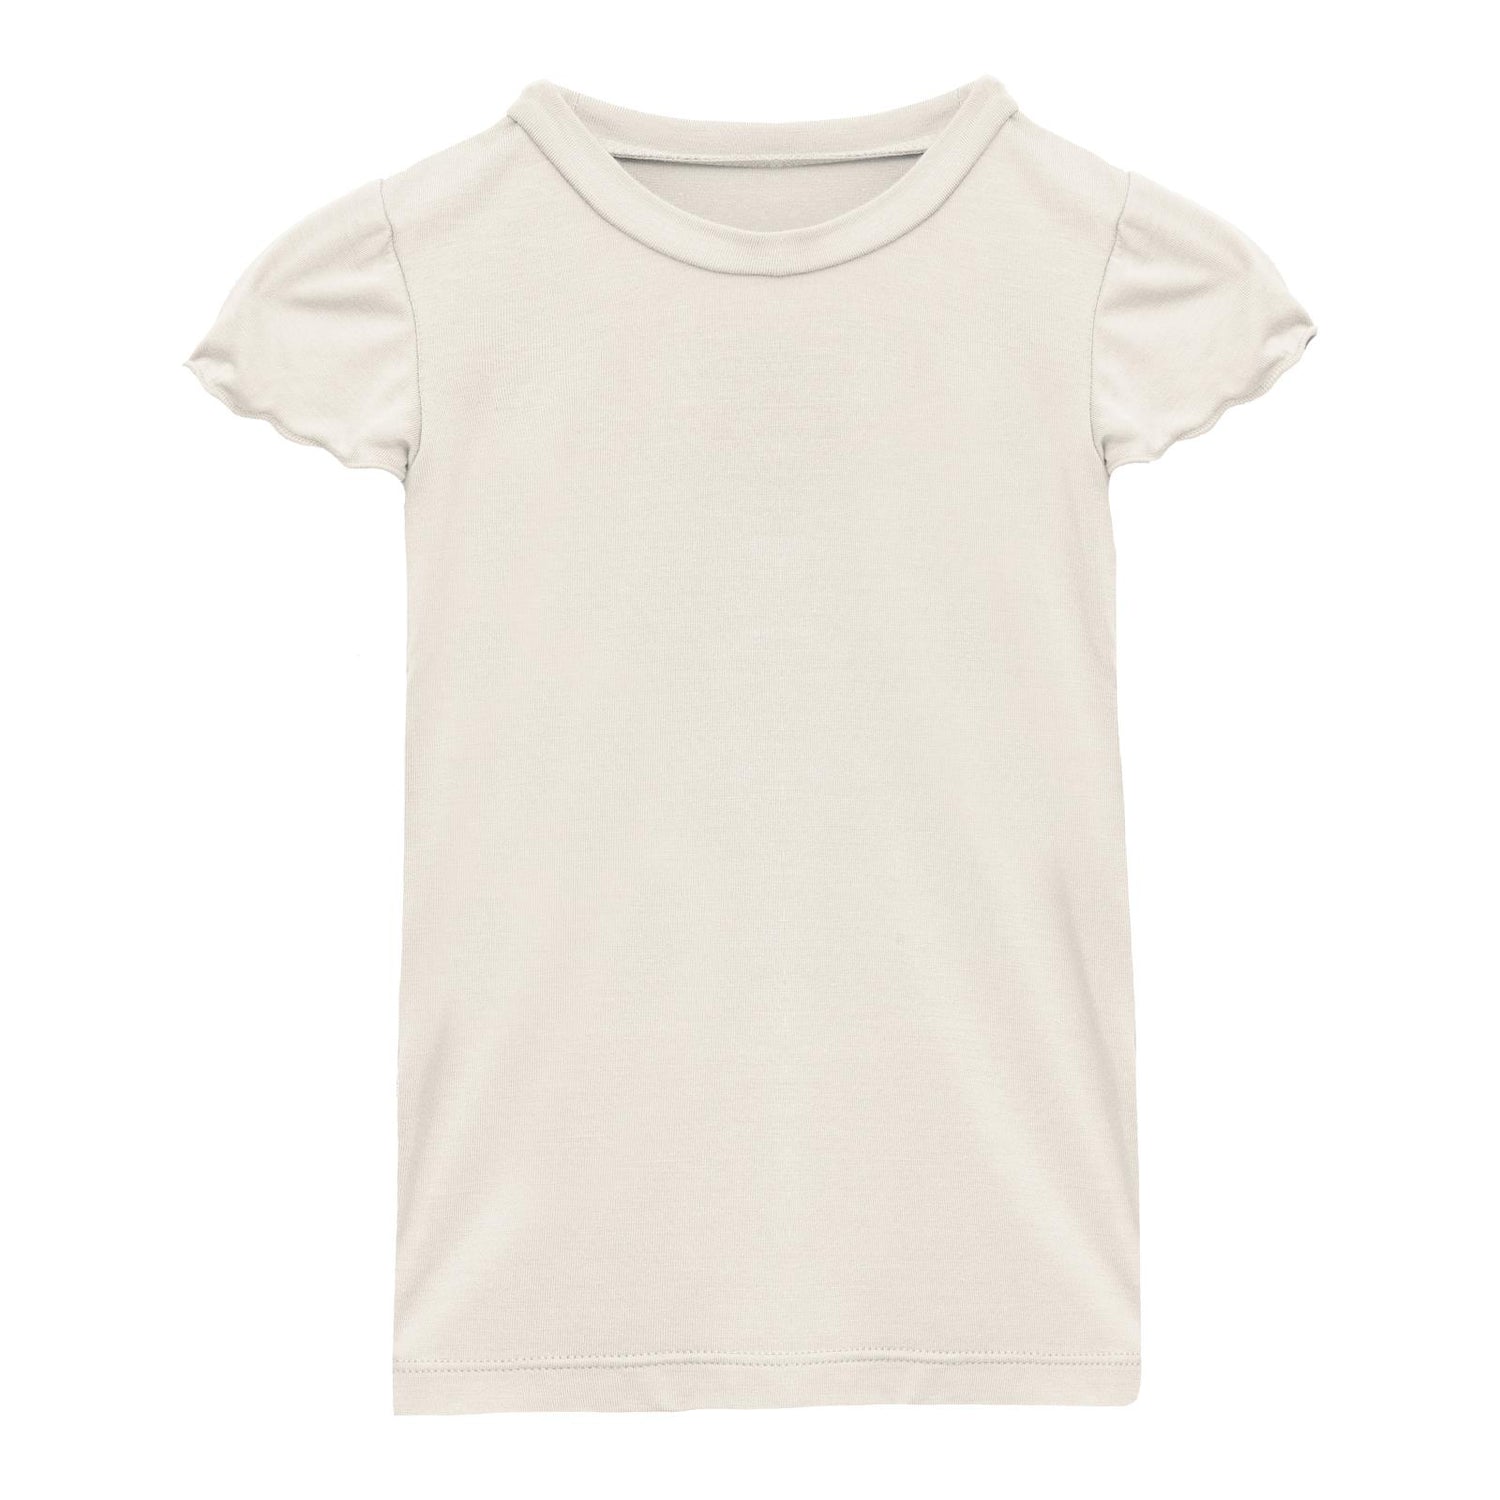 Tailored Fit Flutter Sleeve Tee in Natural